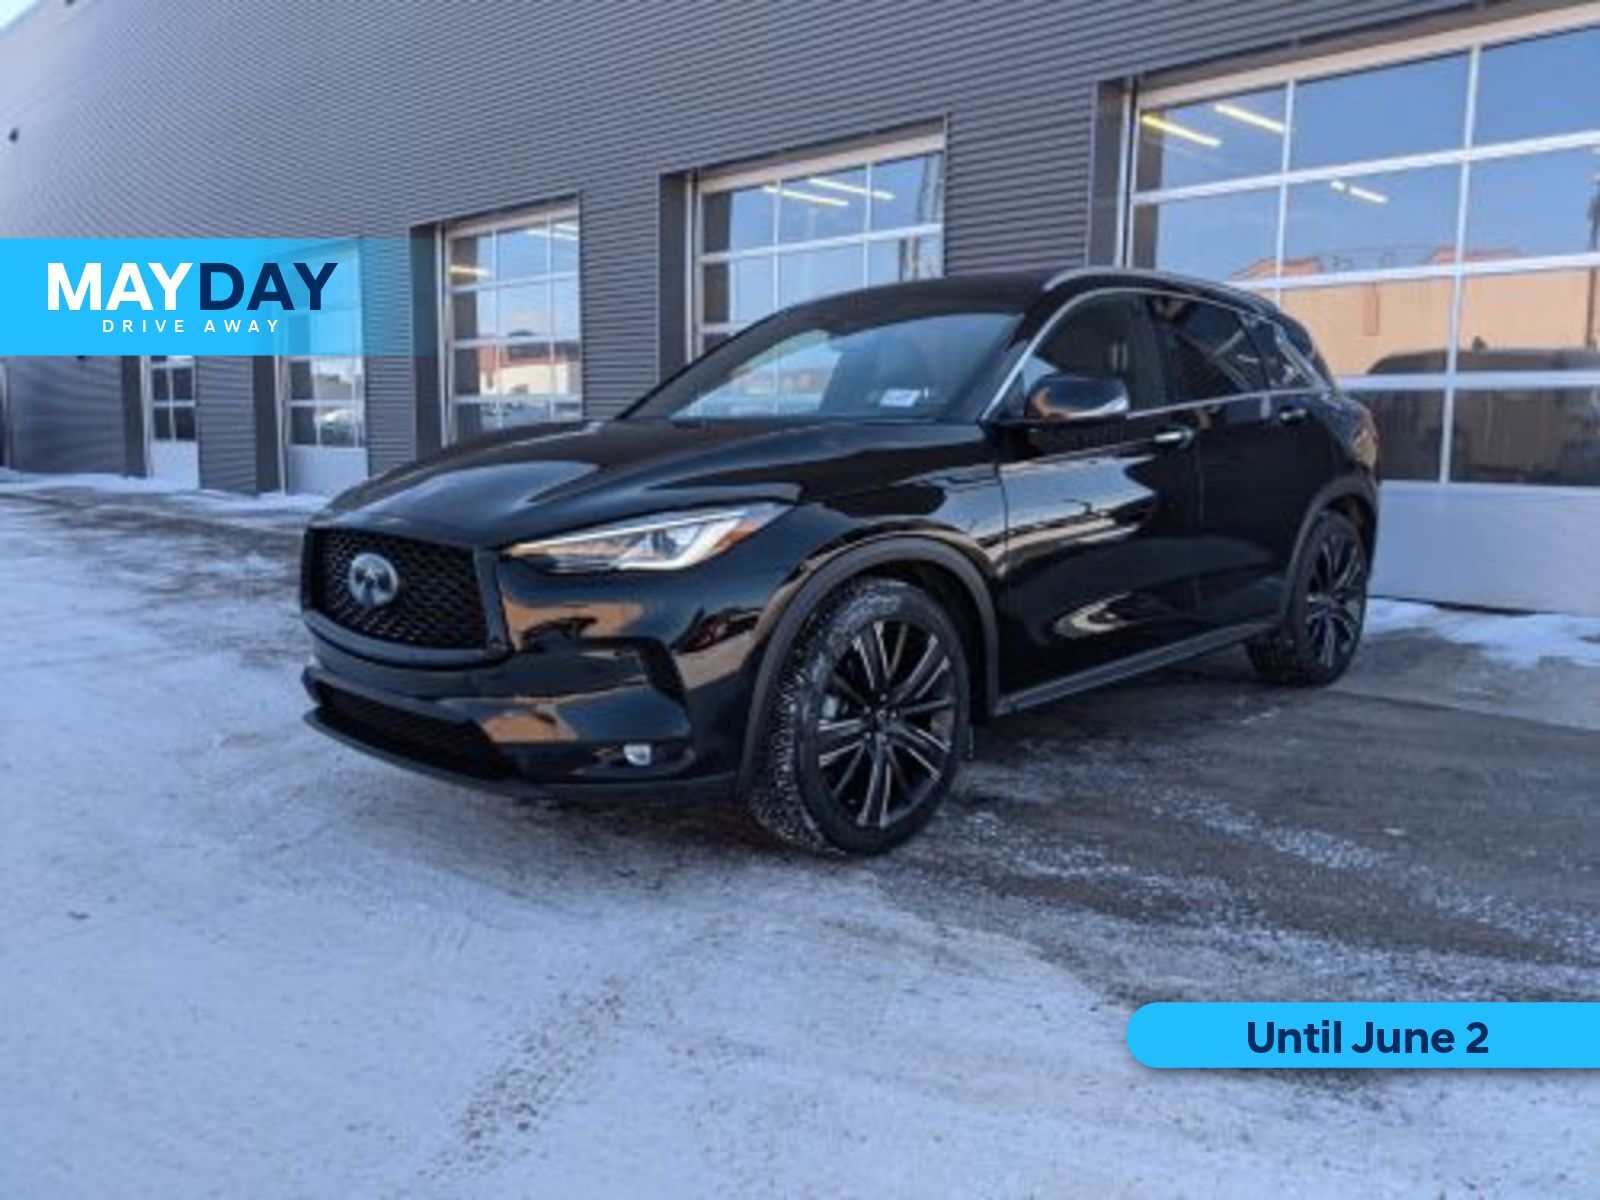 2022 Infiniti QX50 LUXE I-LINE - No Accidents! Low Kms!